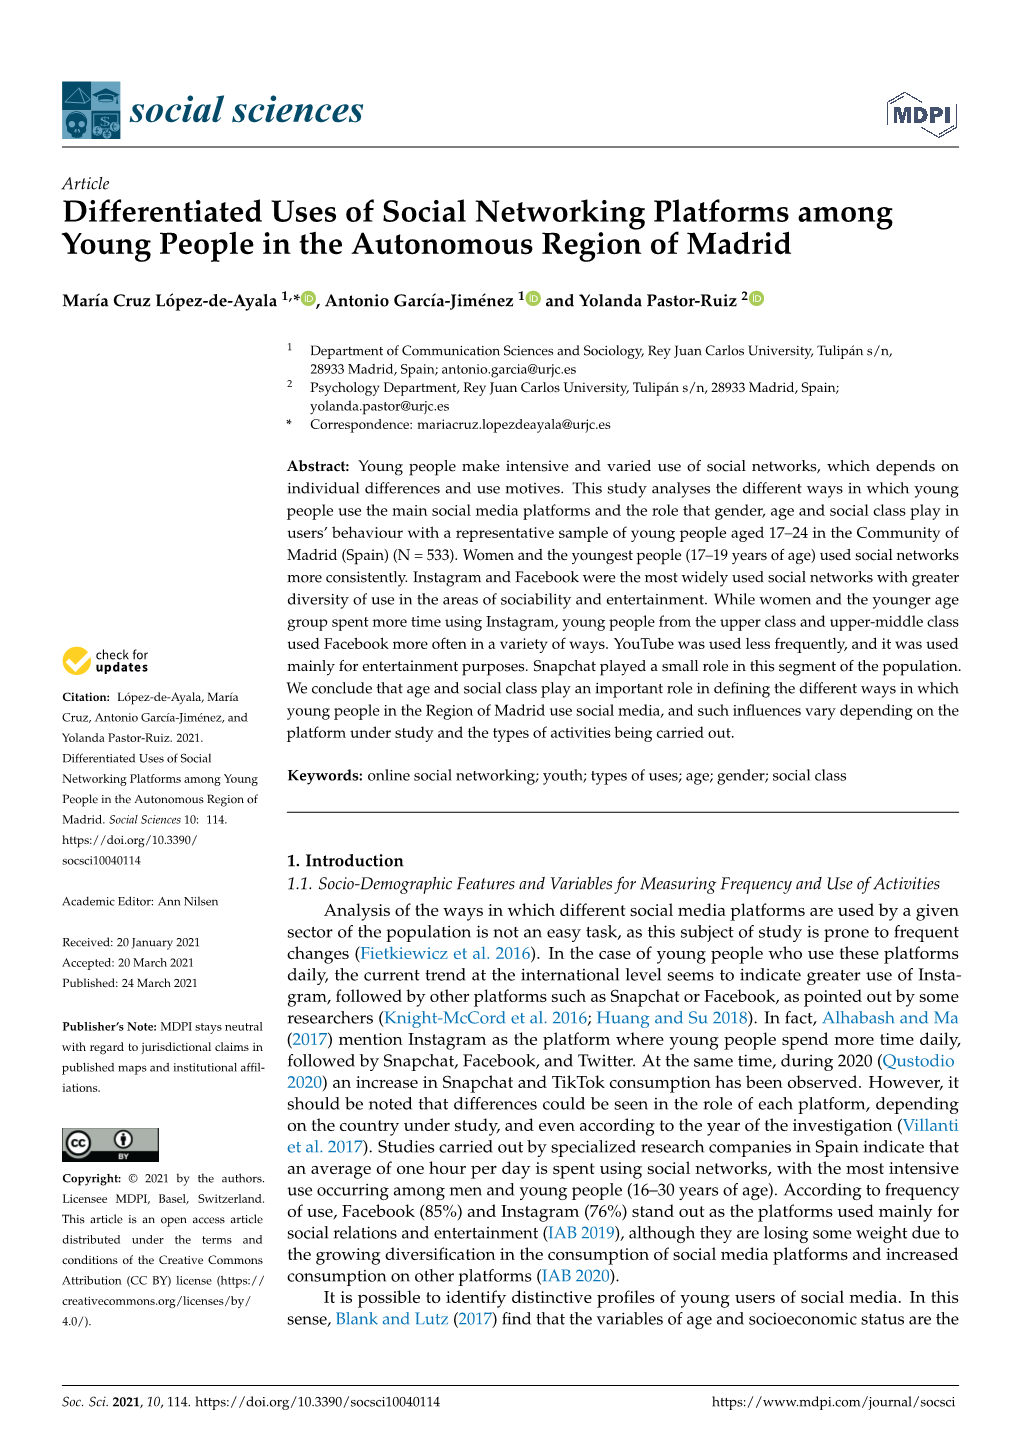 Differentiated Uses of Social Networking Platforms Among Young People in the Autonomous Region of Madrid